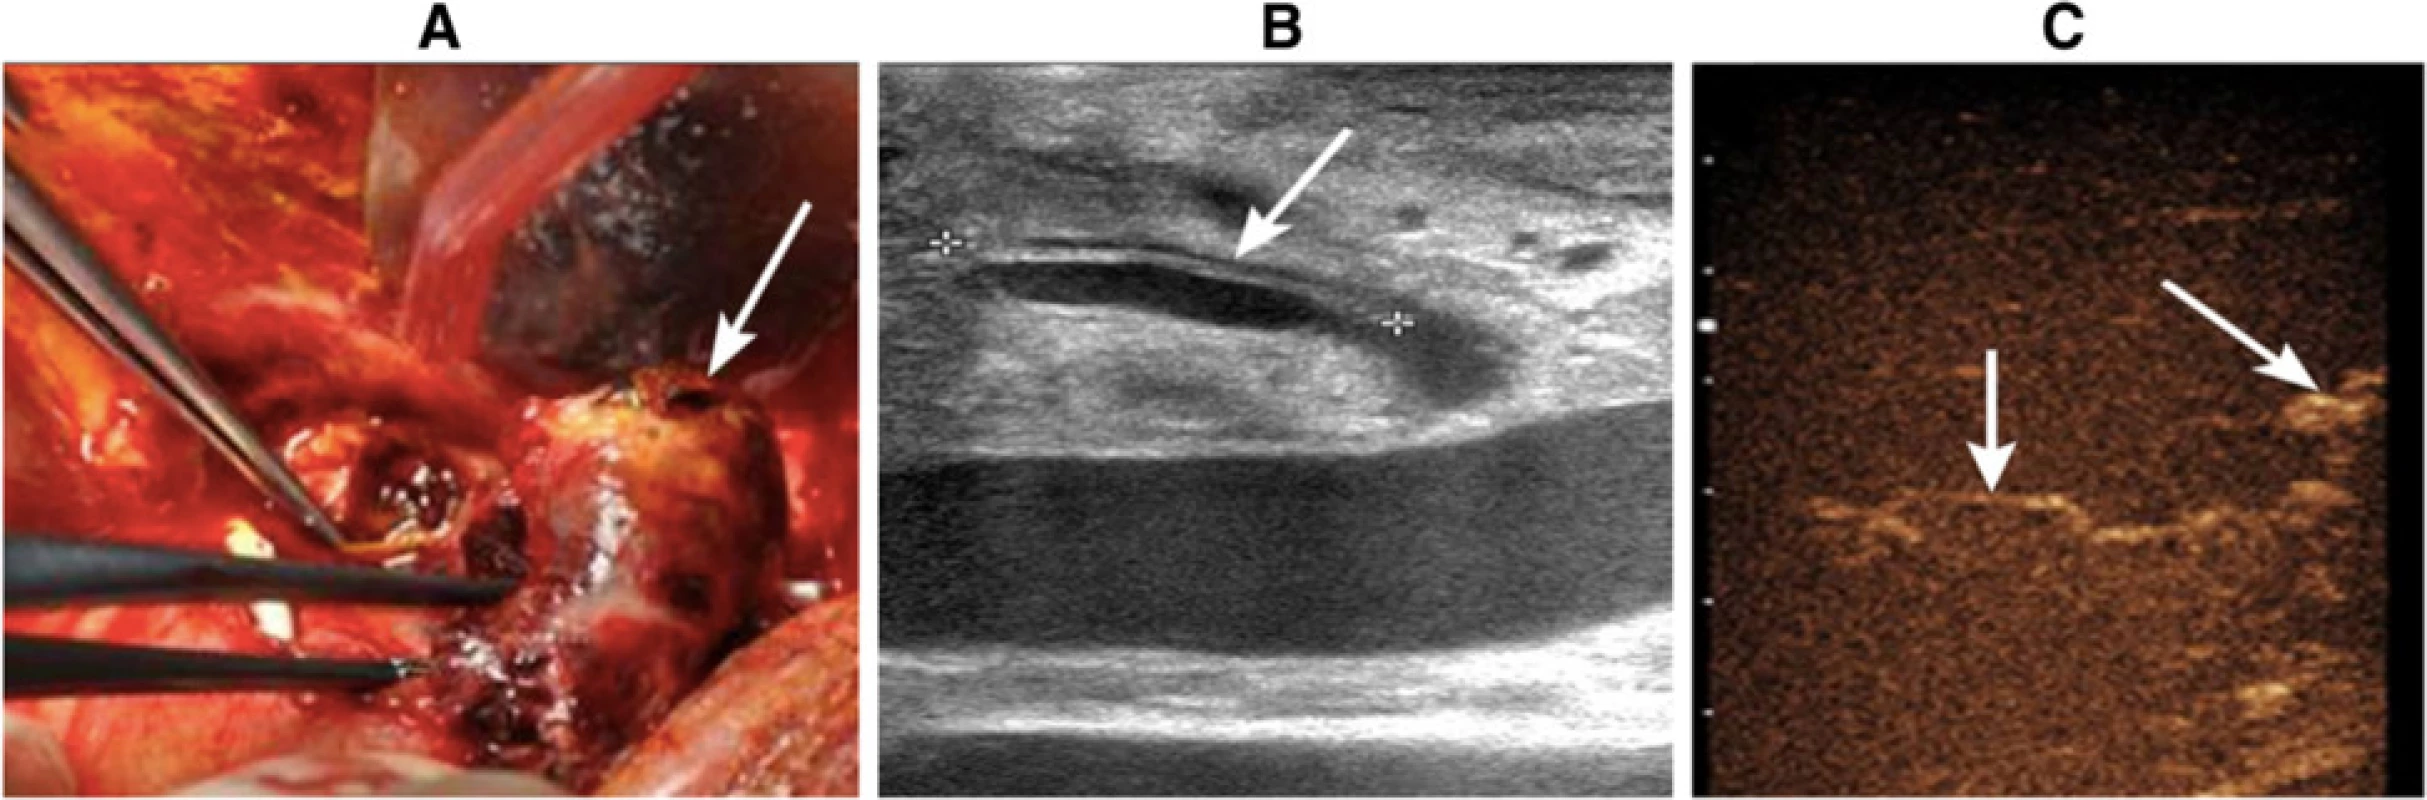 A blood clot that was 4 × 3 cm in size was found in the hilus hepatis during urgent exploratory laparotomy (&lt;i&gt;arrow&lt;/i&gt;). b Hepatic artery dissection was identified by gray-scale ultrasound. c Intraoperative CEUS revealed the opening of collateral circulation